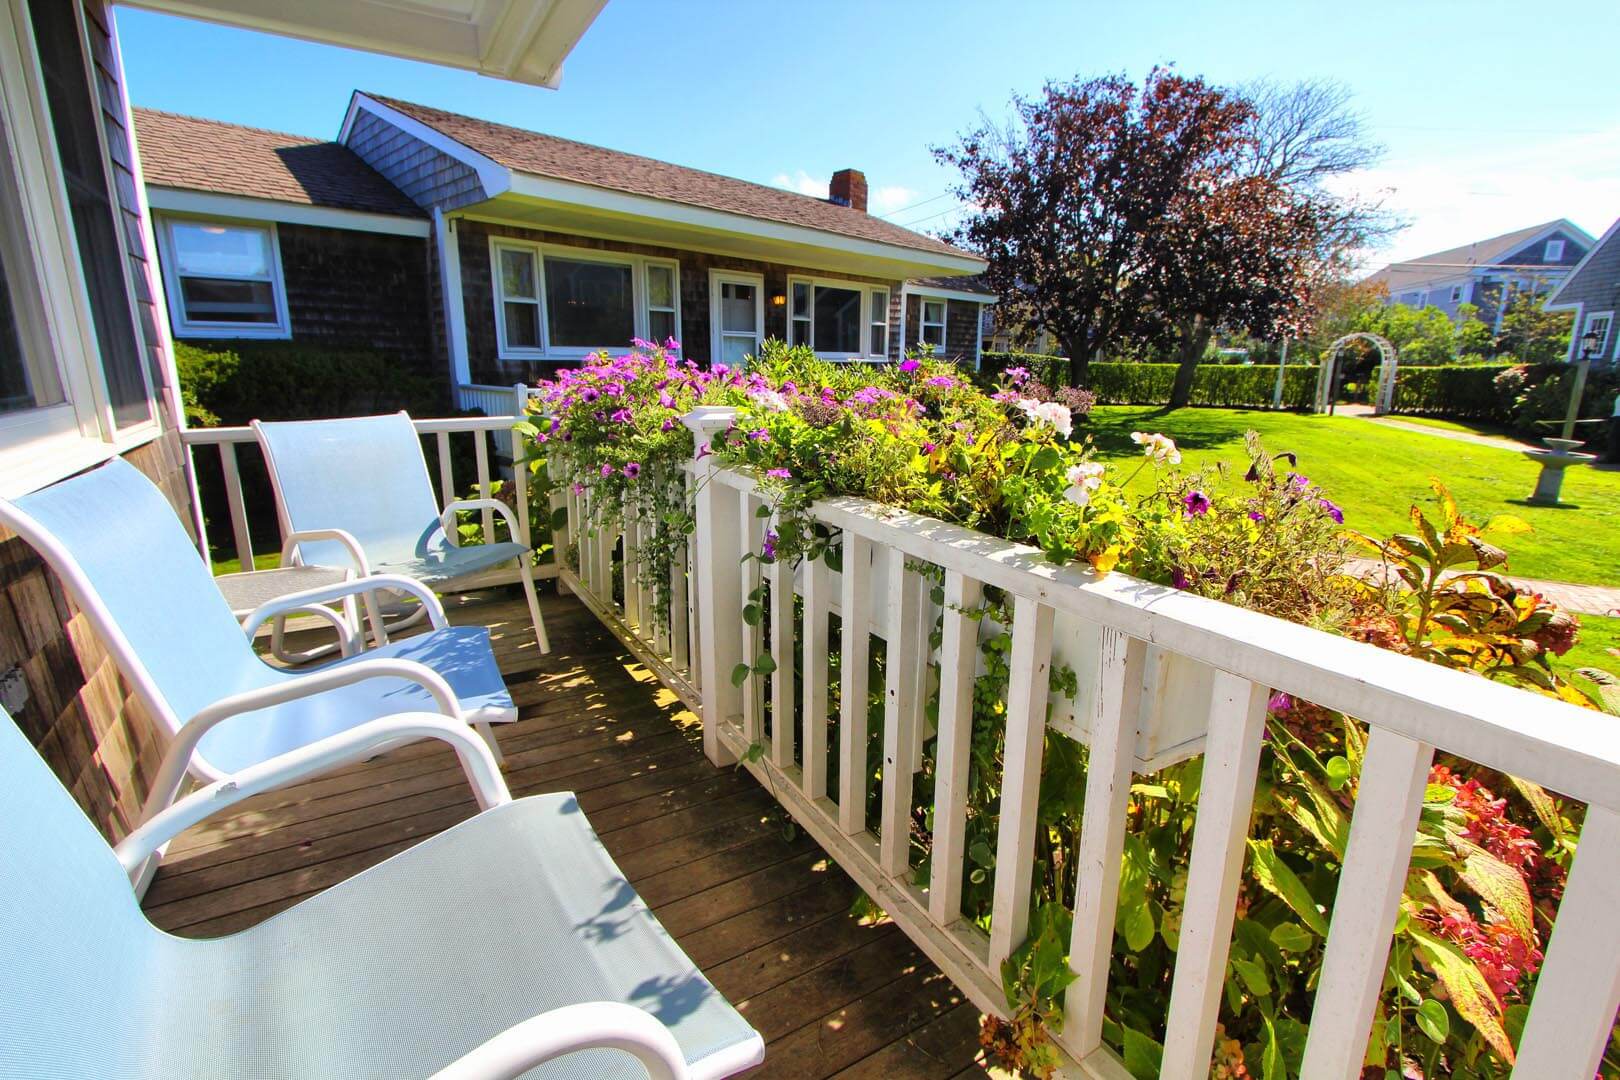 A relaxing view from the patio deck at VRI's Brant Point Courtyard in Massachusetts.